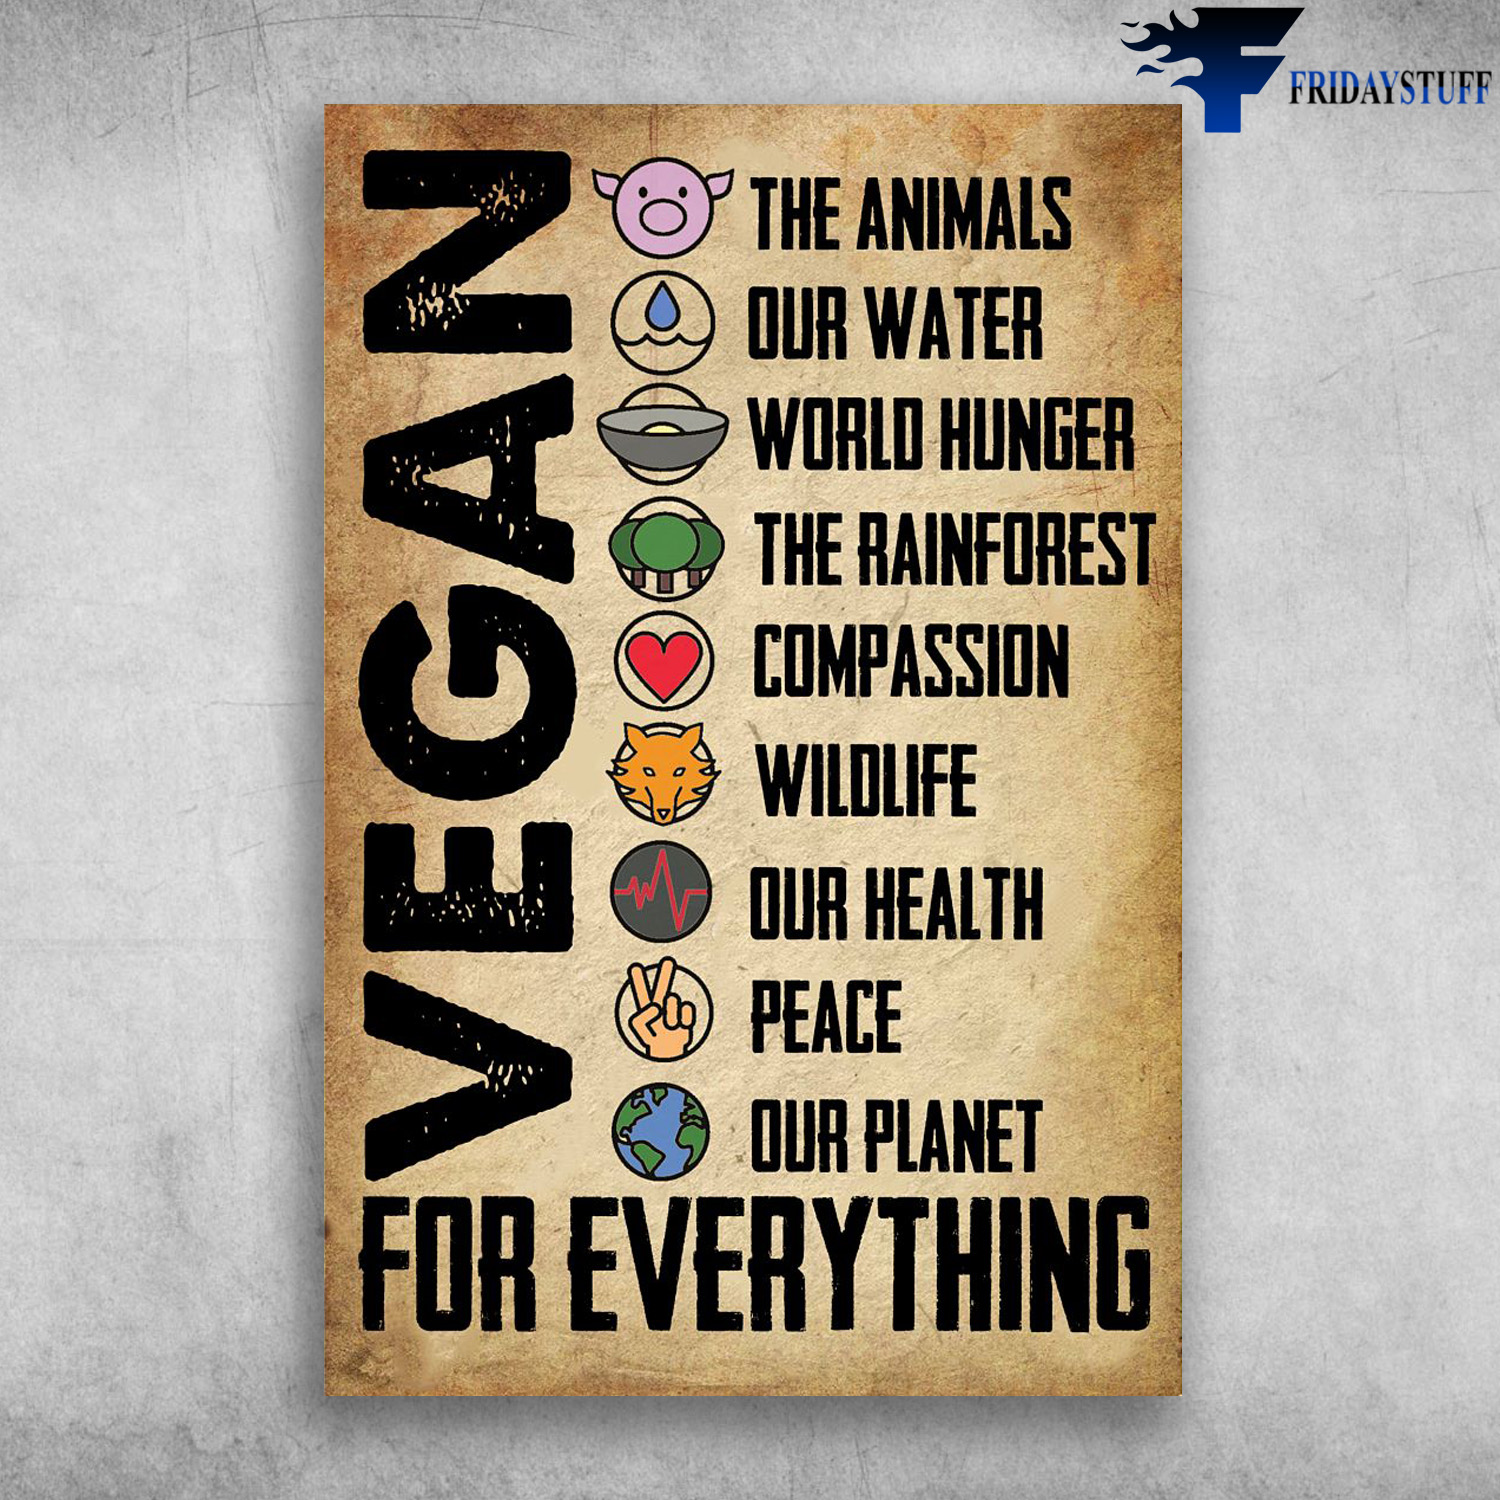 Vegan For Everything - The Animals, Dur Water, World Hunger, The Rainforest, Compassion, Wilolife, Dur Health, Peace, Out Planet